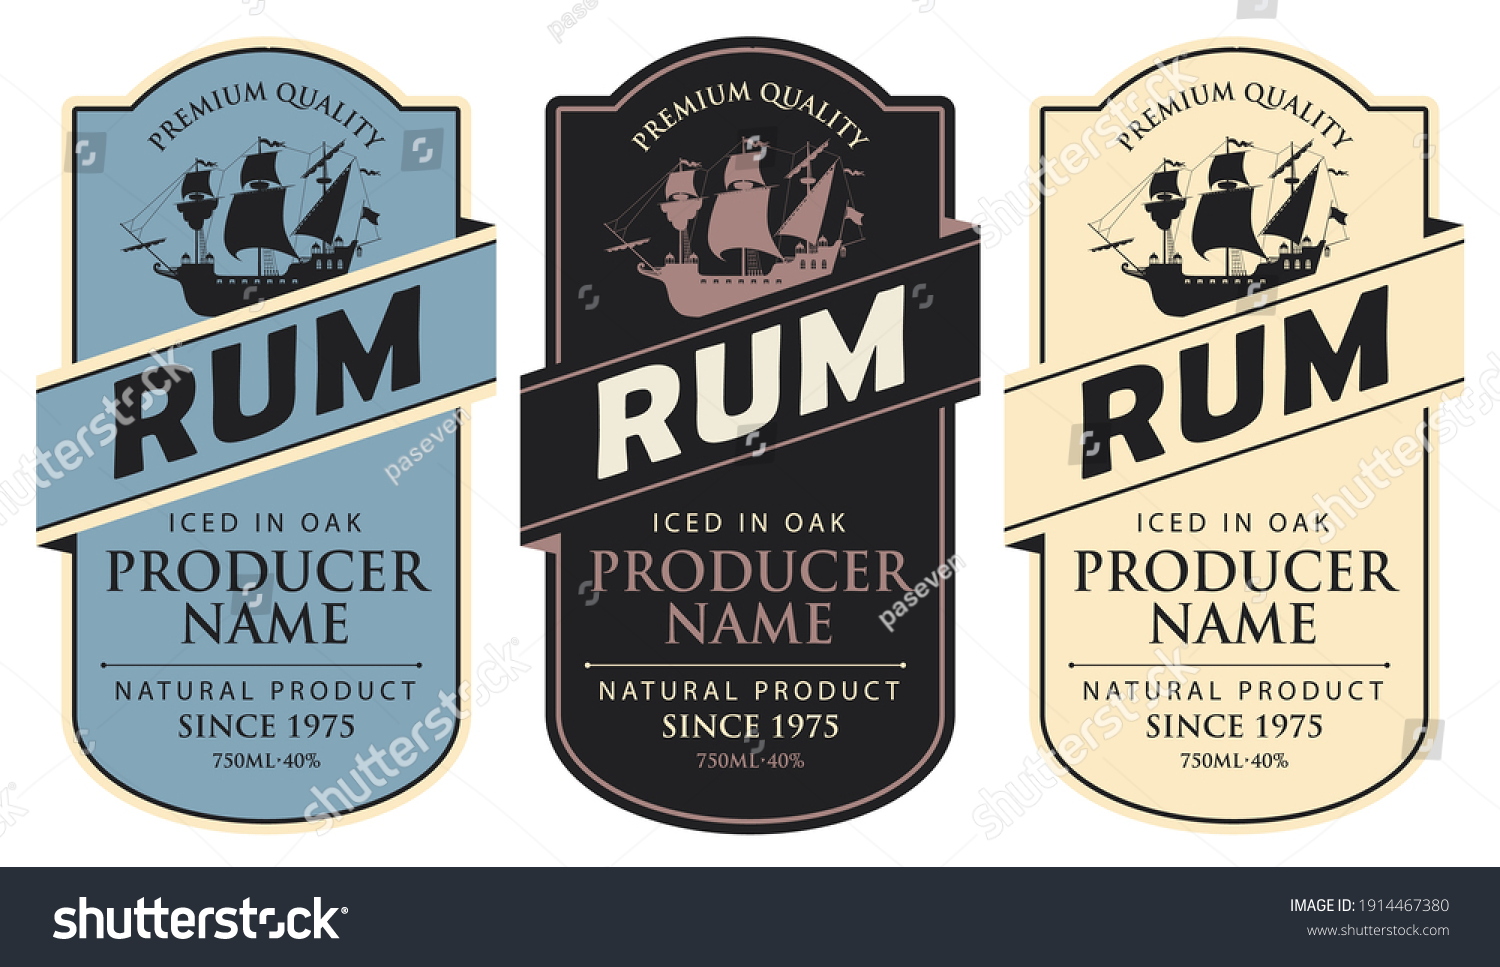 Set of three vector labels for rum in a figured frames with sailing ships and inscriptions in retro style. Premium quality, iced in oak, collection of strong alcoholic beverages #1914467380